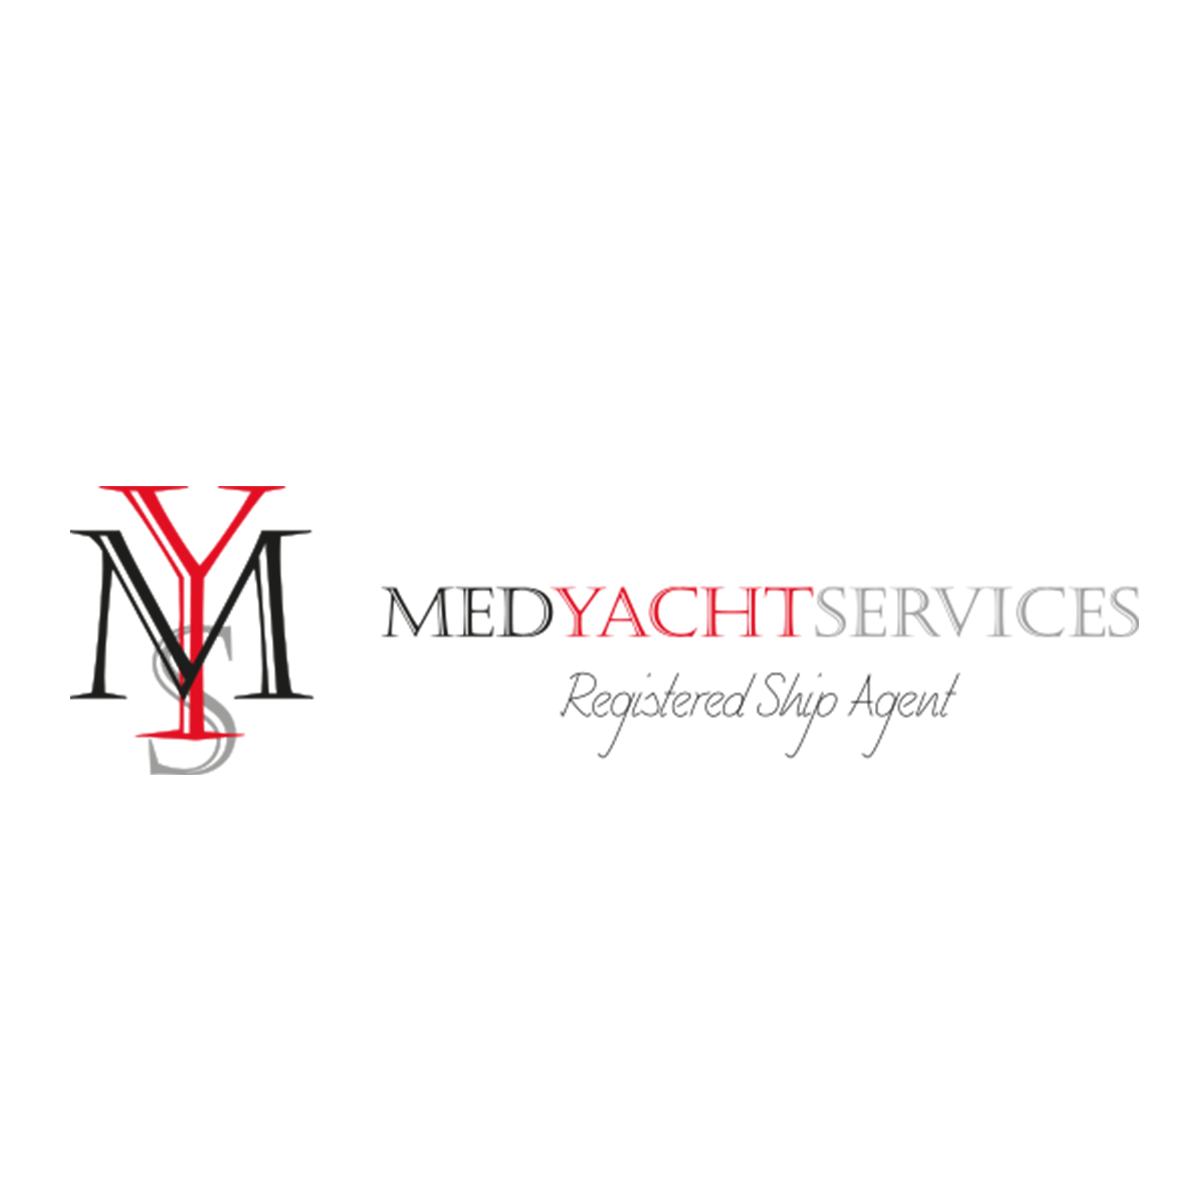 MED YACHT SERVICES